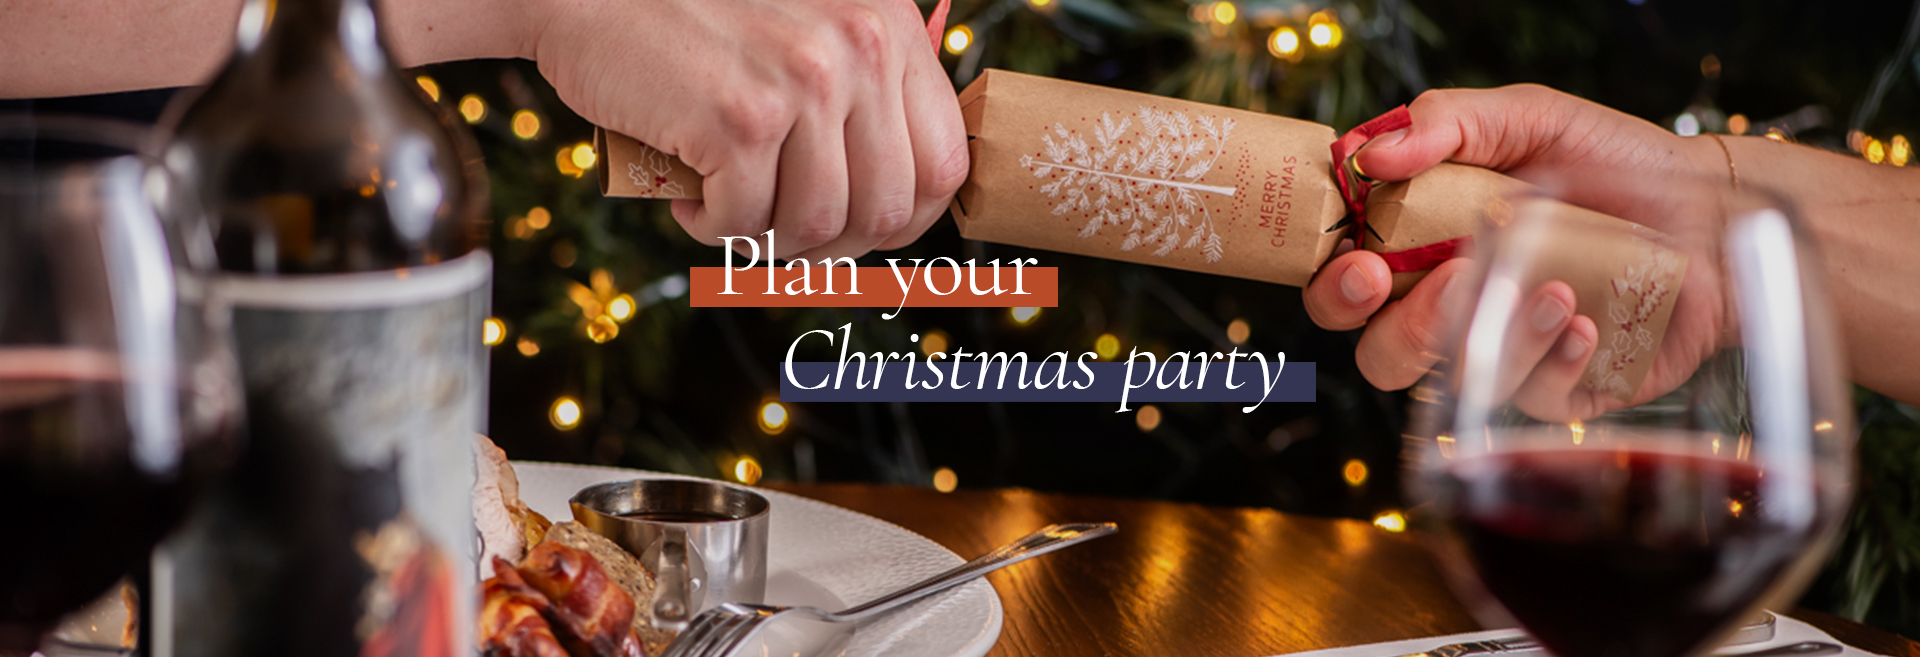 Christmas party at The Builder's Arms